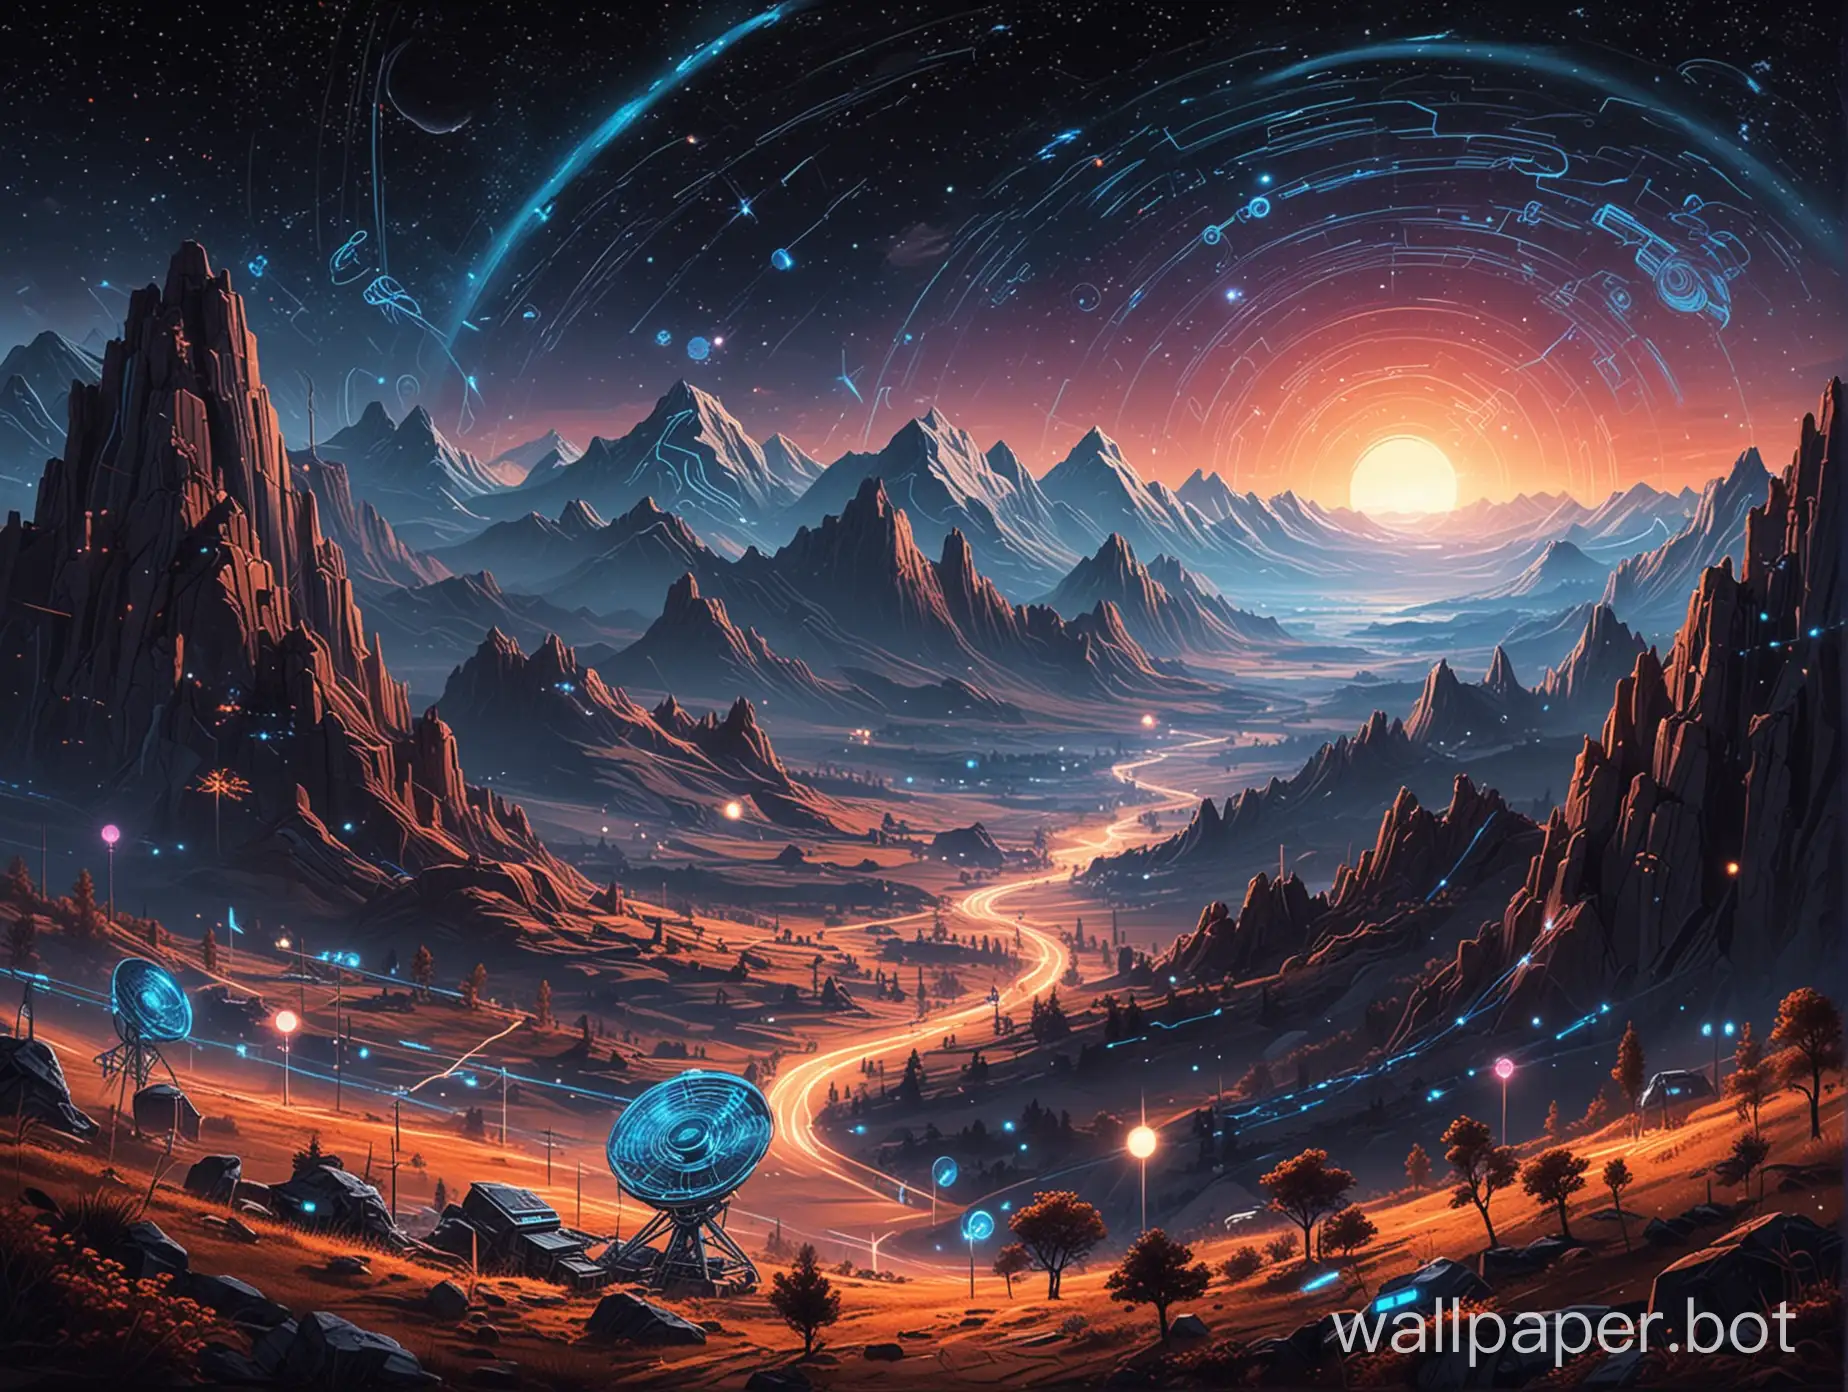 TronInspired-Radio-Astronomy-Stars-Circuits-and-Mountains-Merge-in-Futuristic-Art